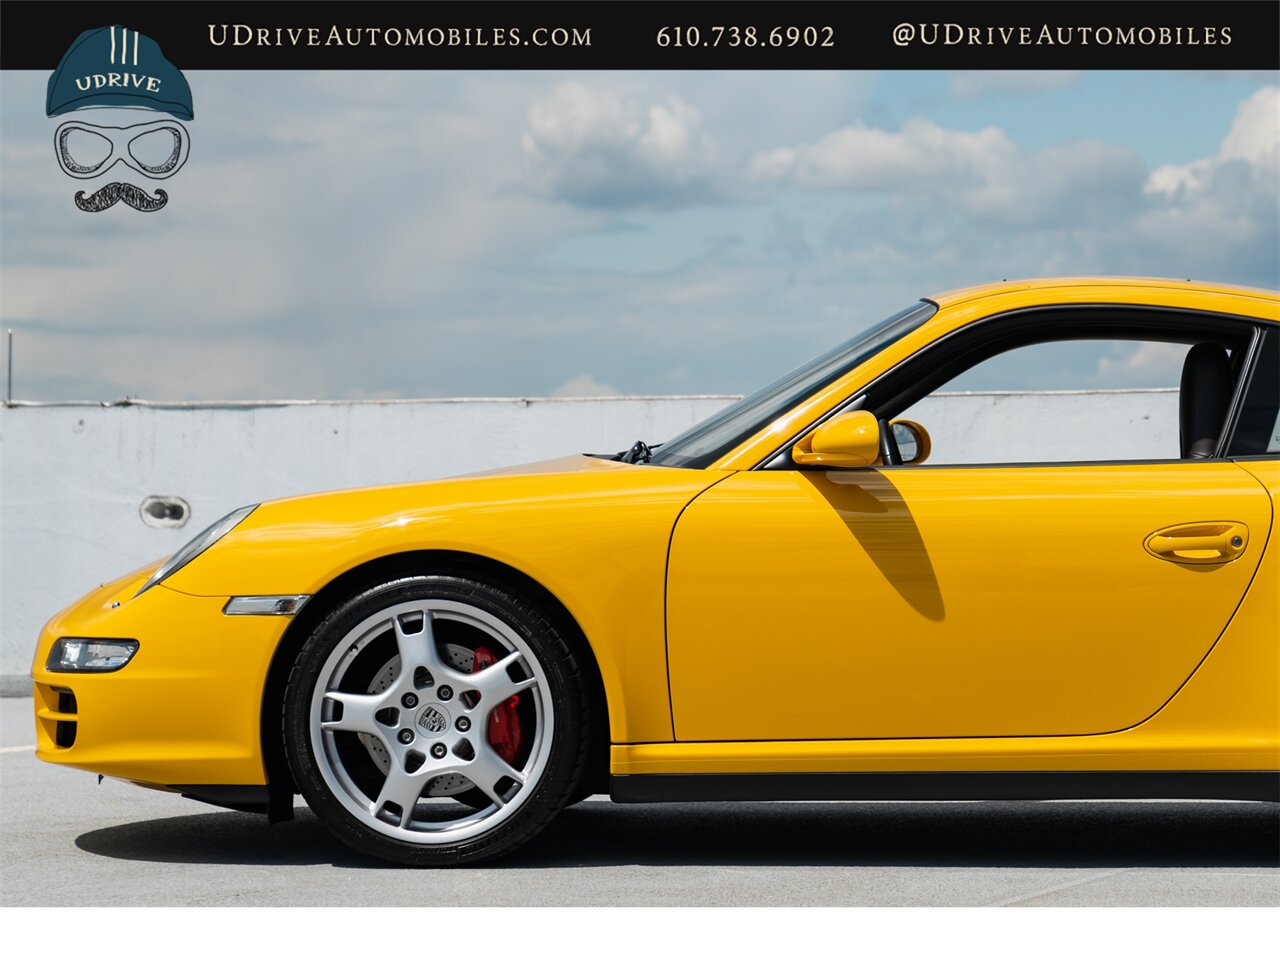 2006 Porsche 911 Carrera 4S  997 C4S 6 Speed Cocoa Full Lthr Chrono Sport Exhaust Special Color Combo - Photo 11 - West Chester, PA 19382